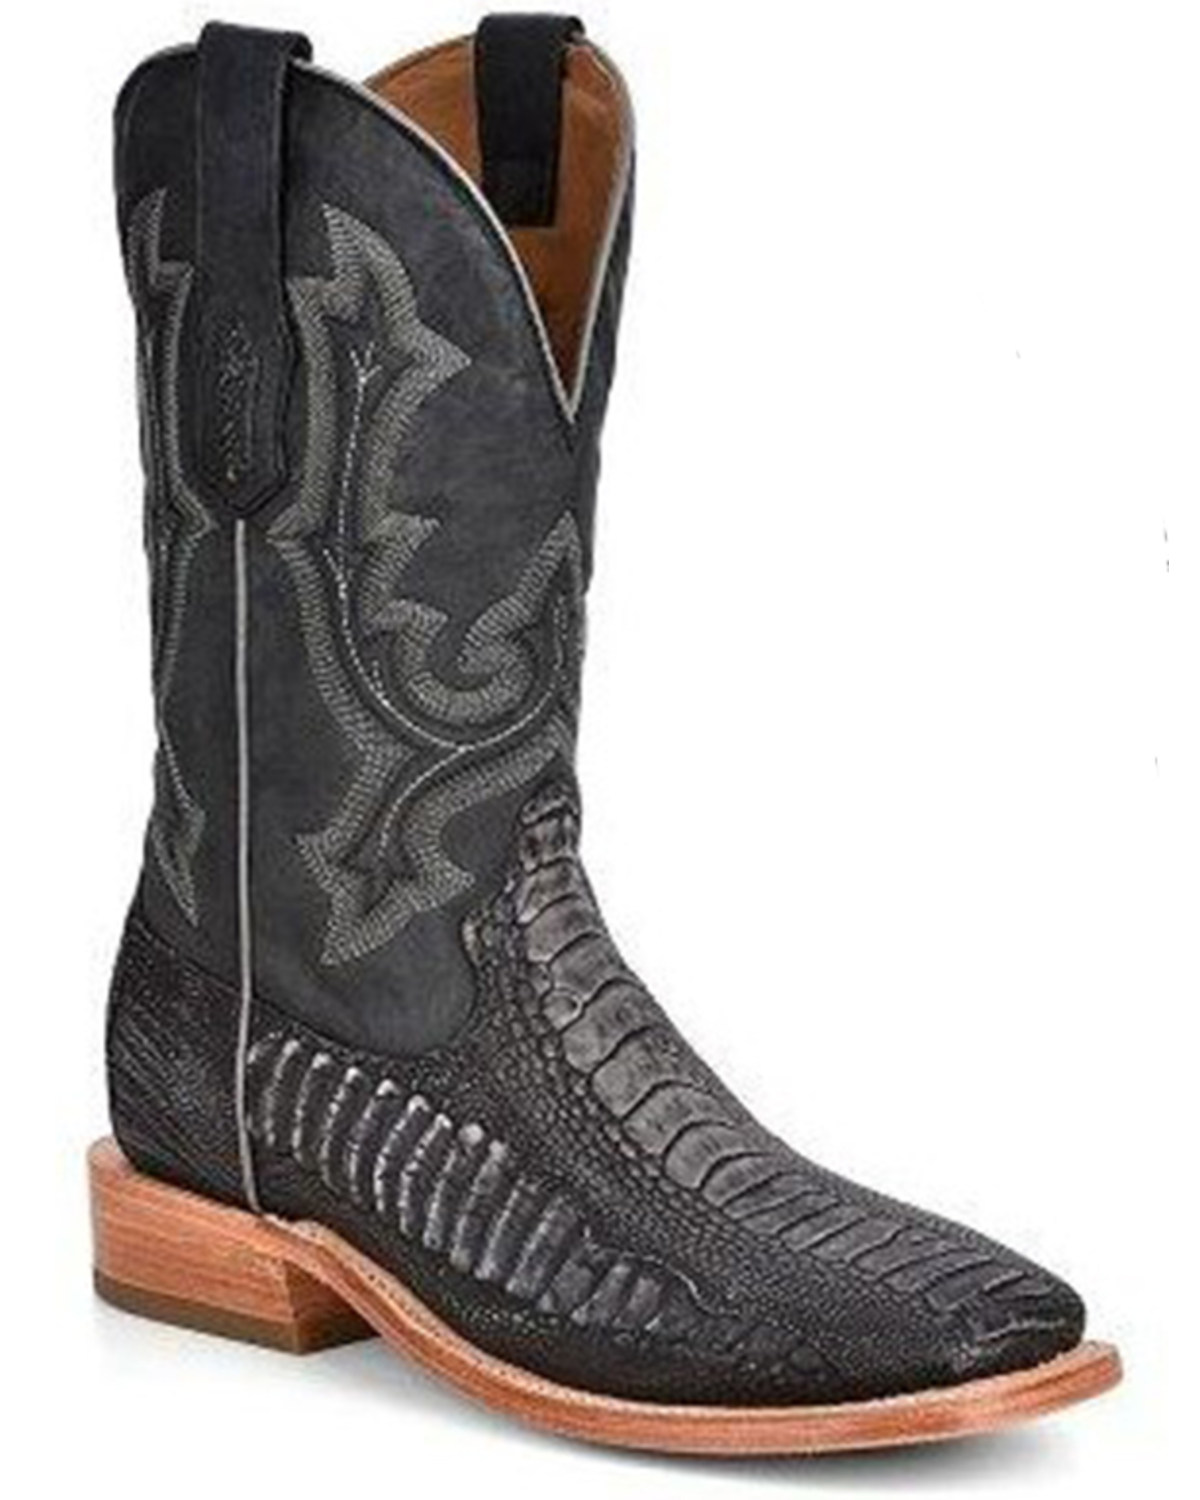 Corral Men's Ostrich Leg Embroidered Western Boots - Square Toe